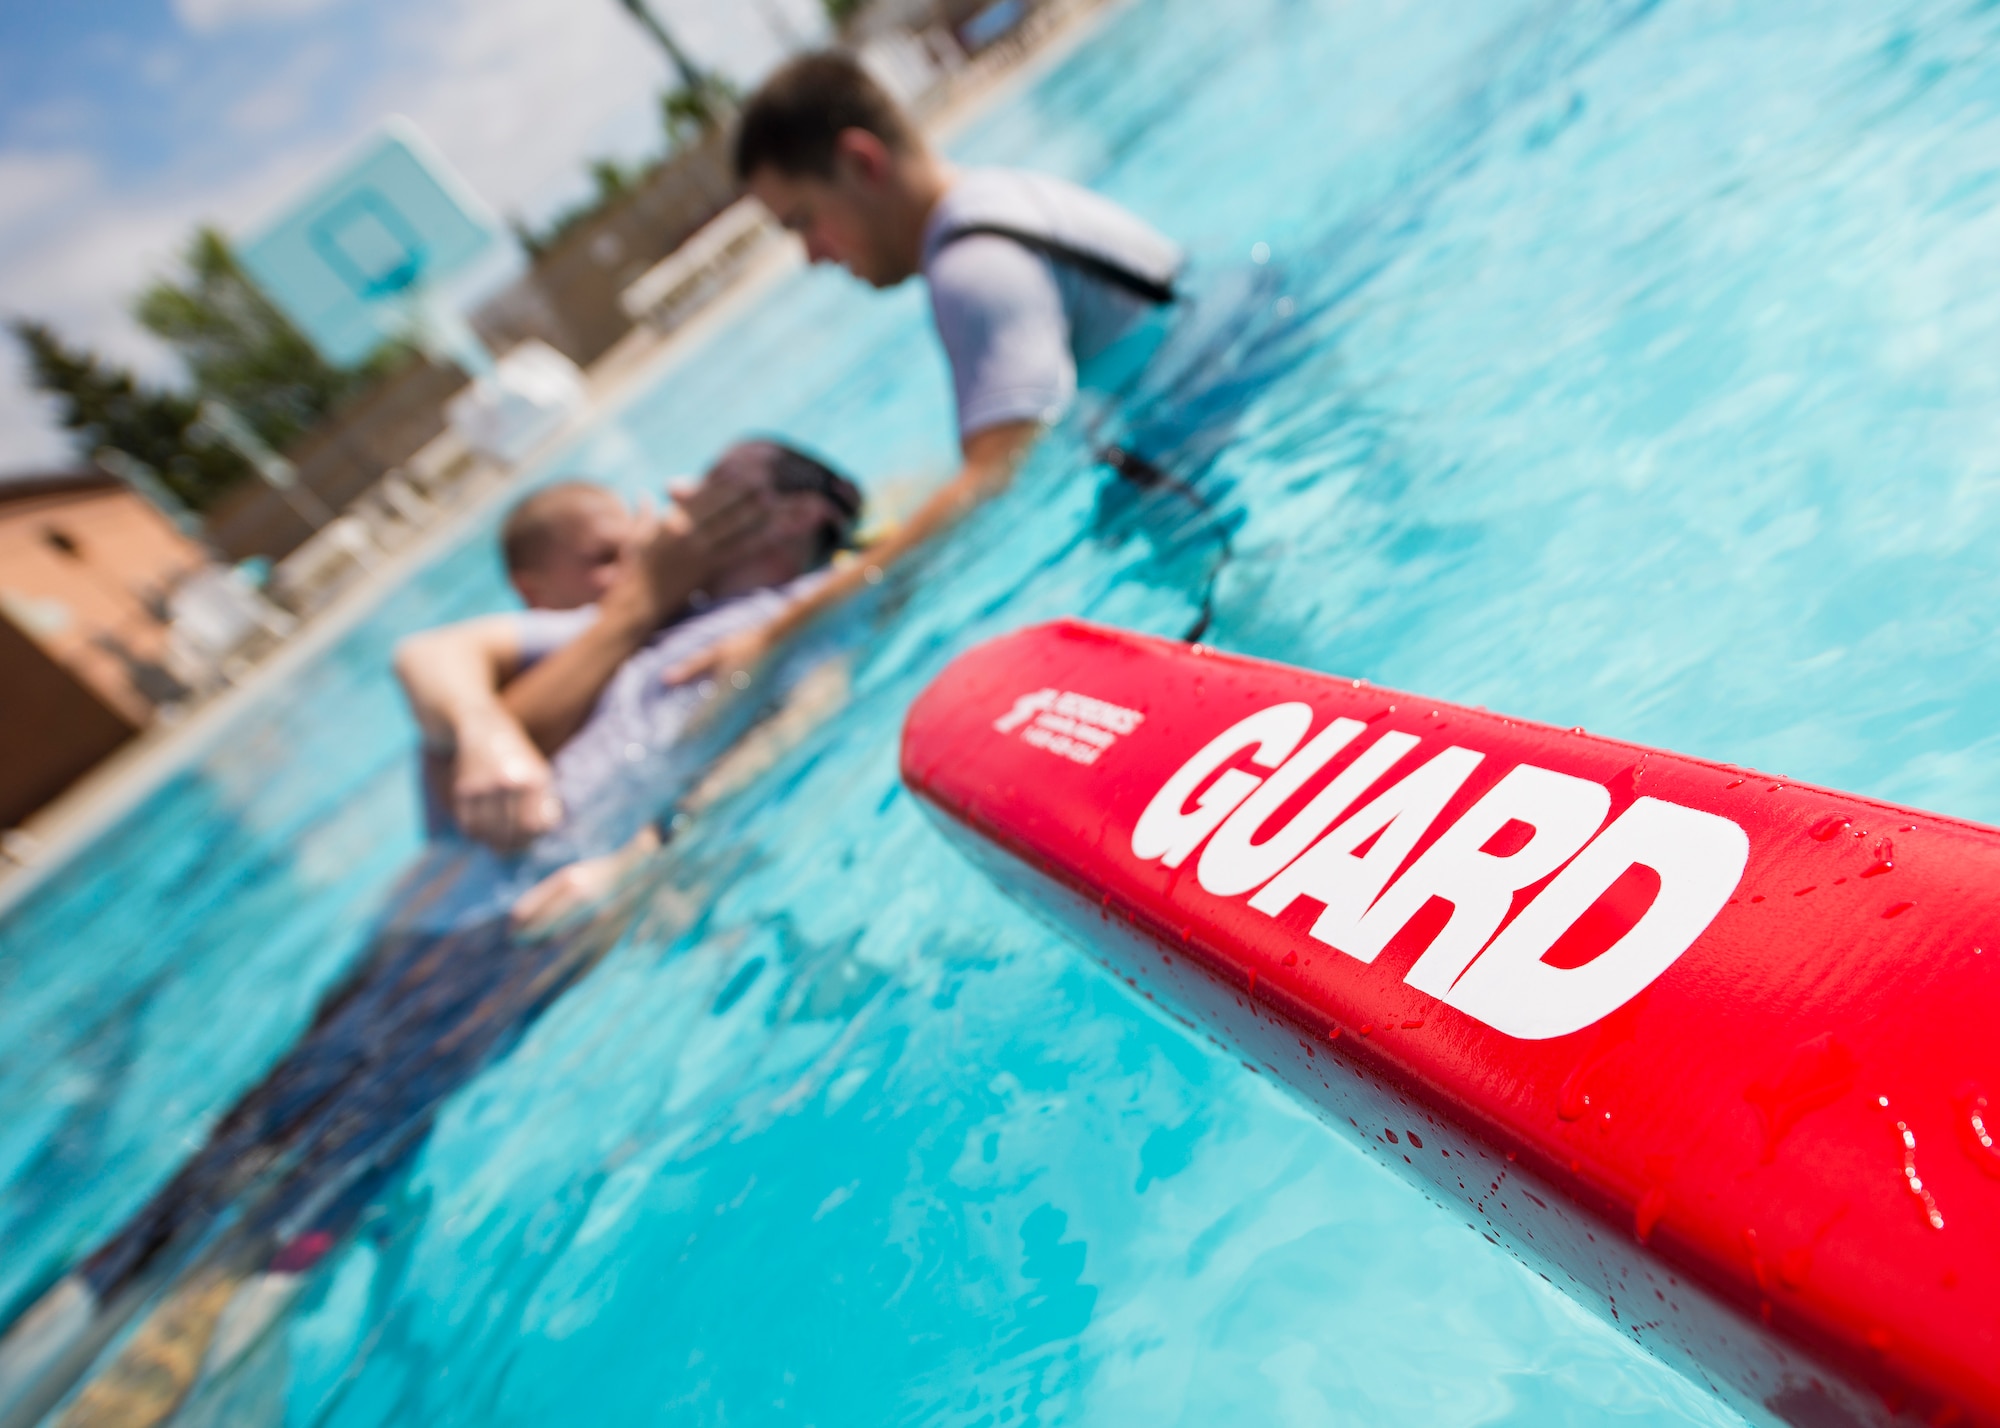 A lifeguard buoy floats in the base pool during the 5th Medical Operation Squadron’s water extraction training at Minot Air Force Base, N.D., Aug. 10, 2016. The lifeguard buoys are used to help keep the water rescue board afloat while the patient is being extracted from the water. (U.S. Air Force photo/Airman 1st Class J.T. Armstrong)